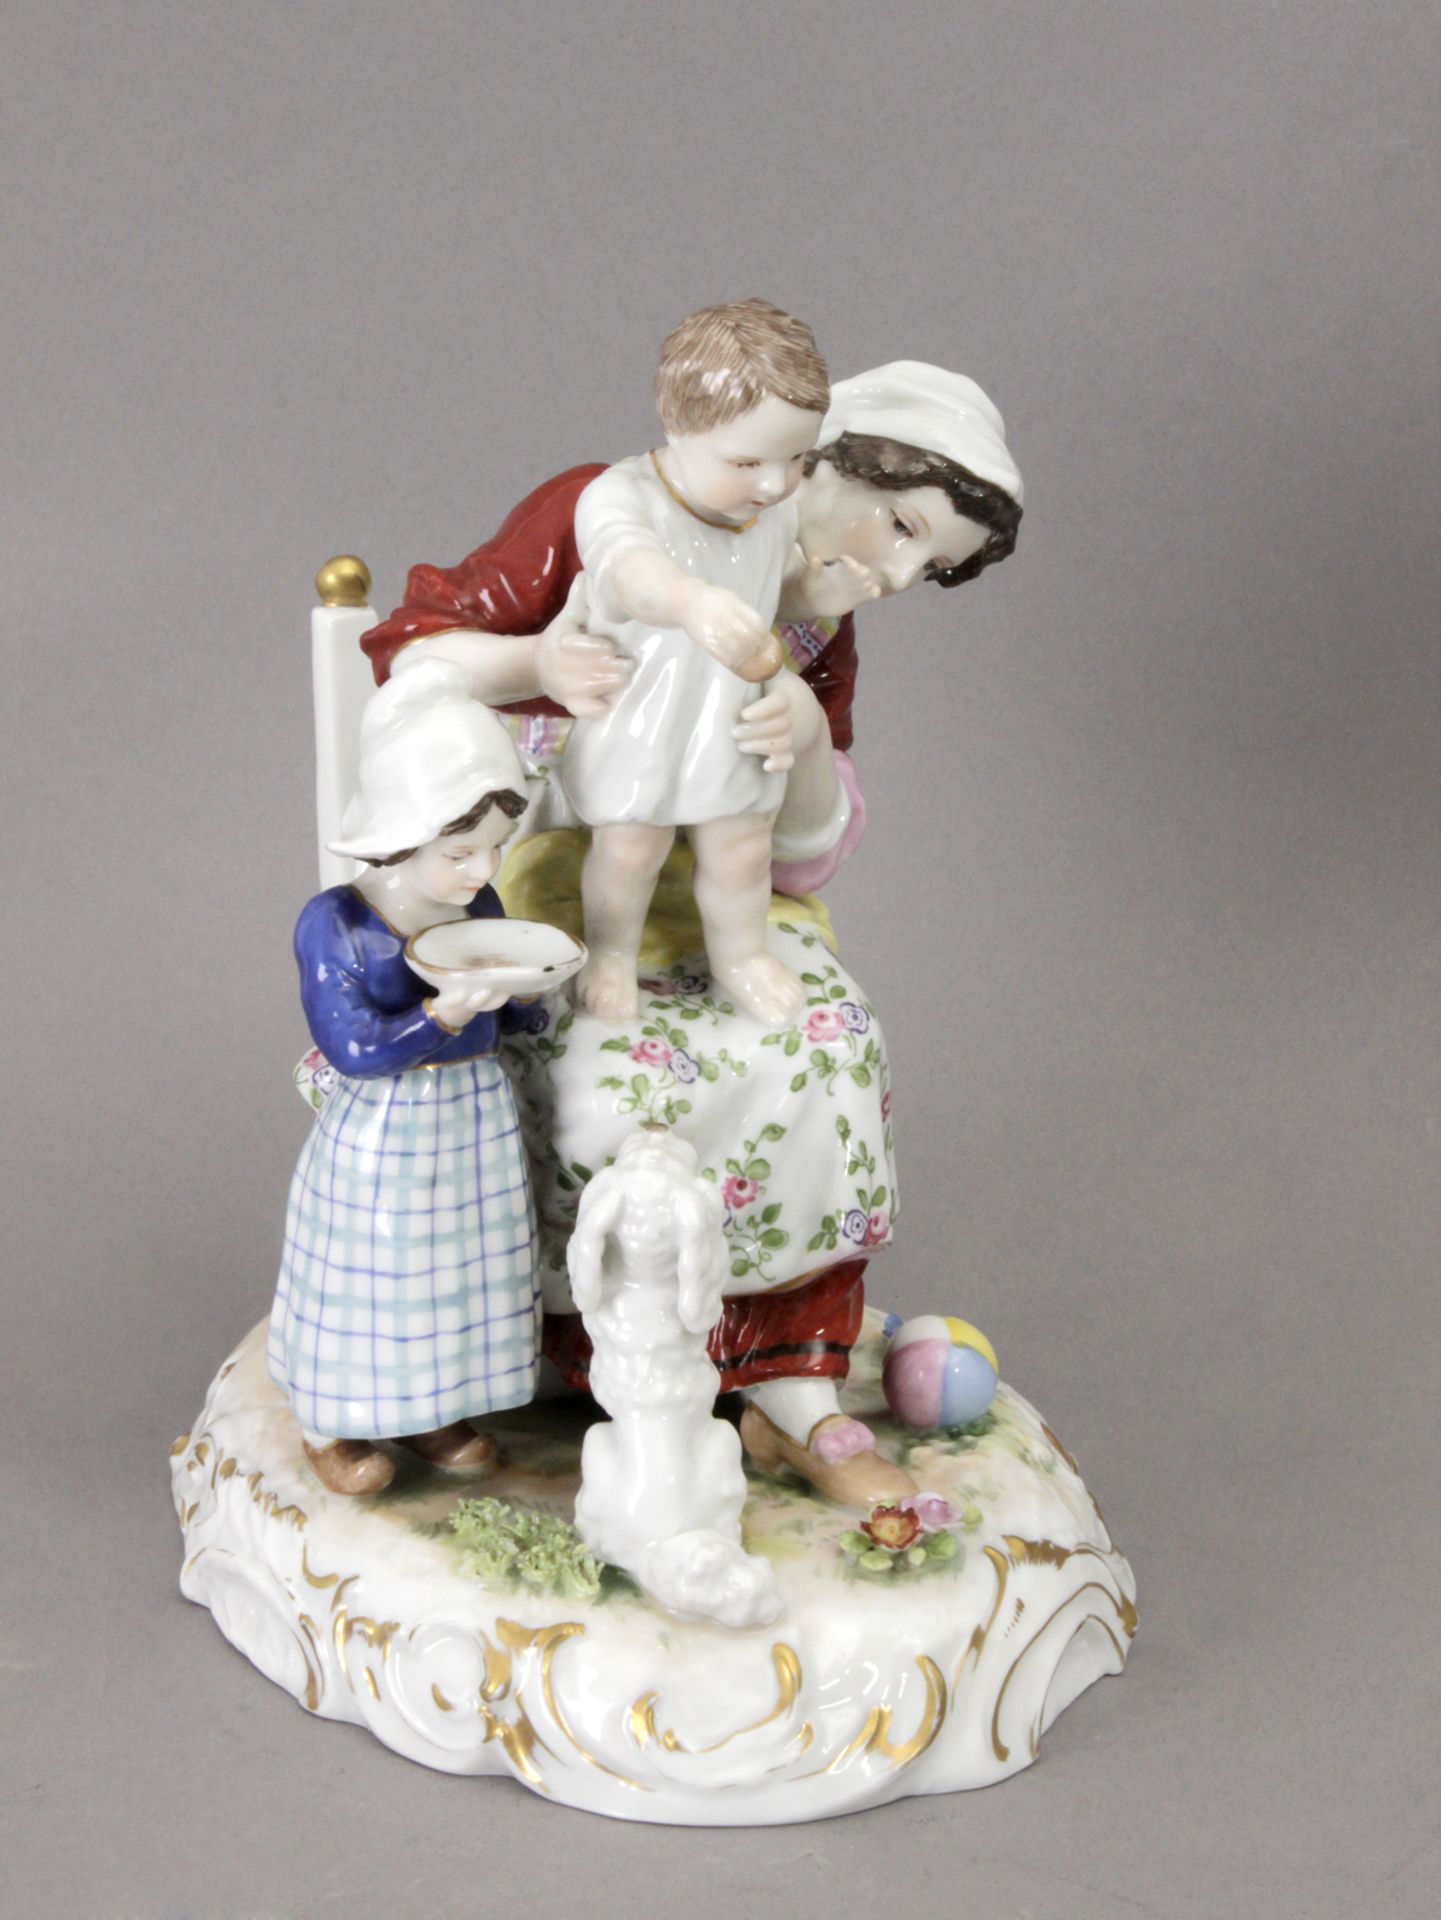 An early 20th century group of figurines in German porcelain